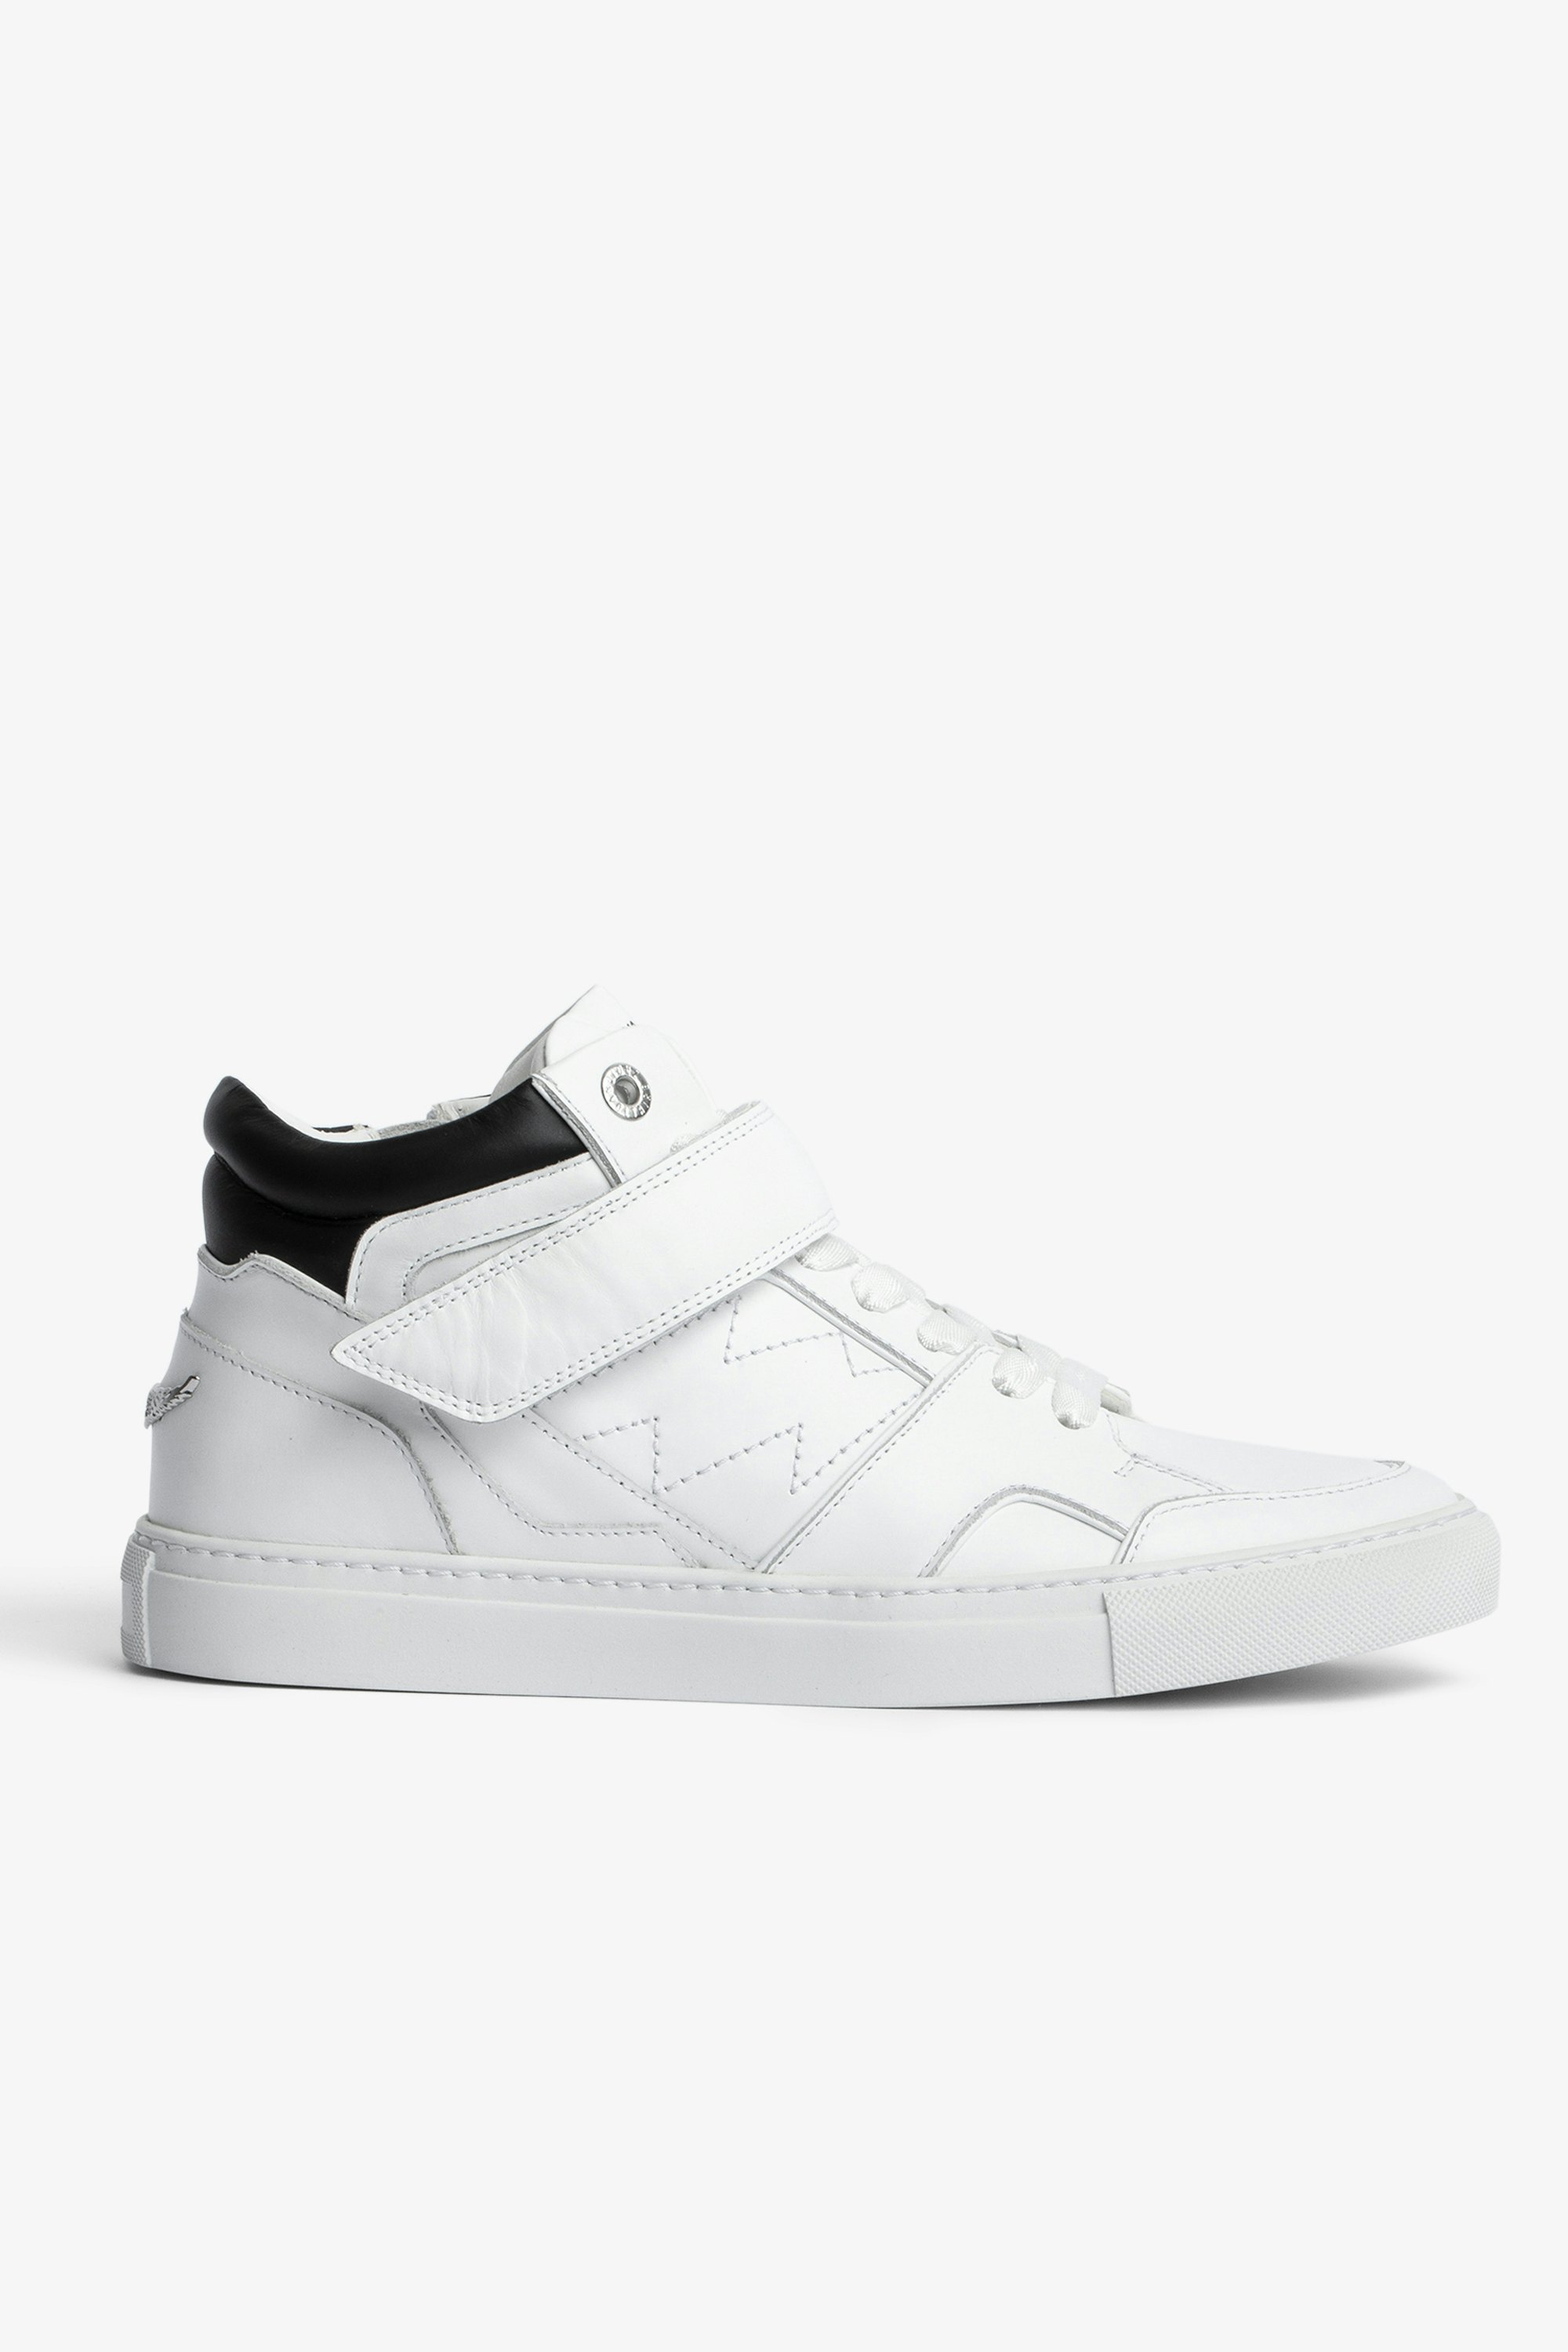 ZV1747 Mid Flash trainers - Women’s white leather mid-top sneakers